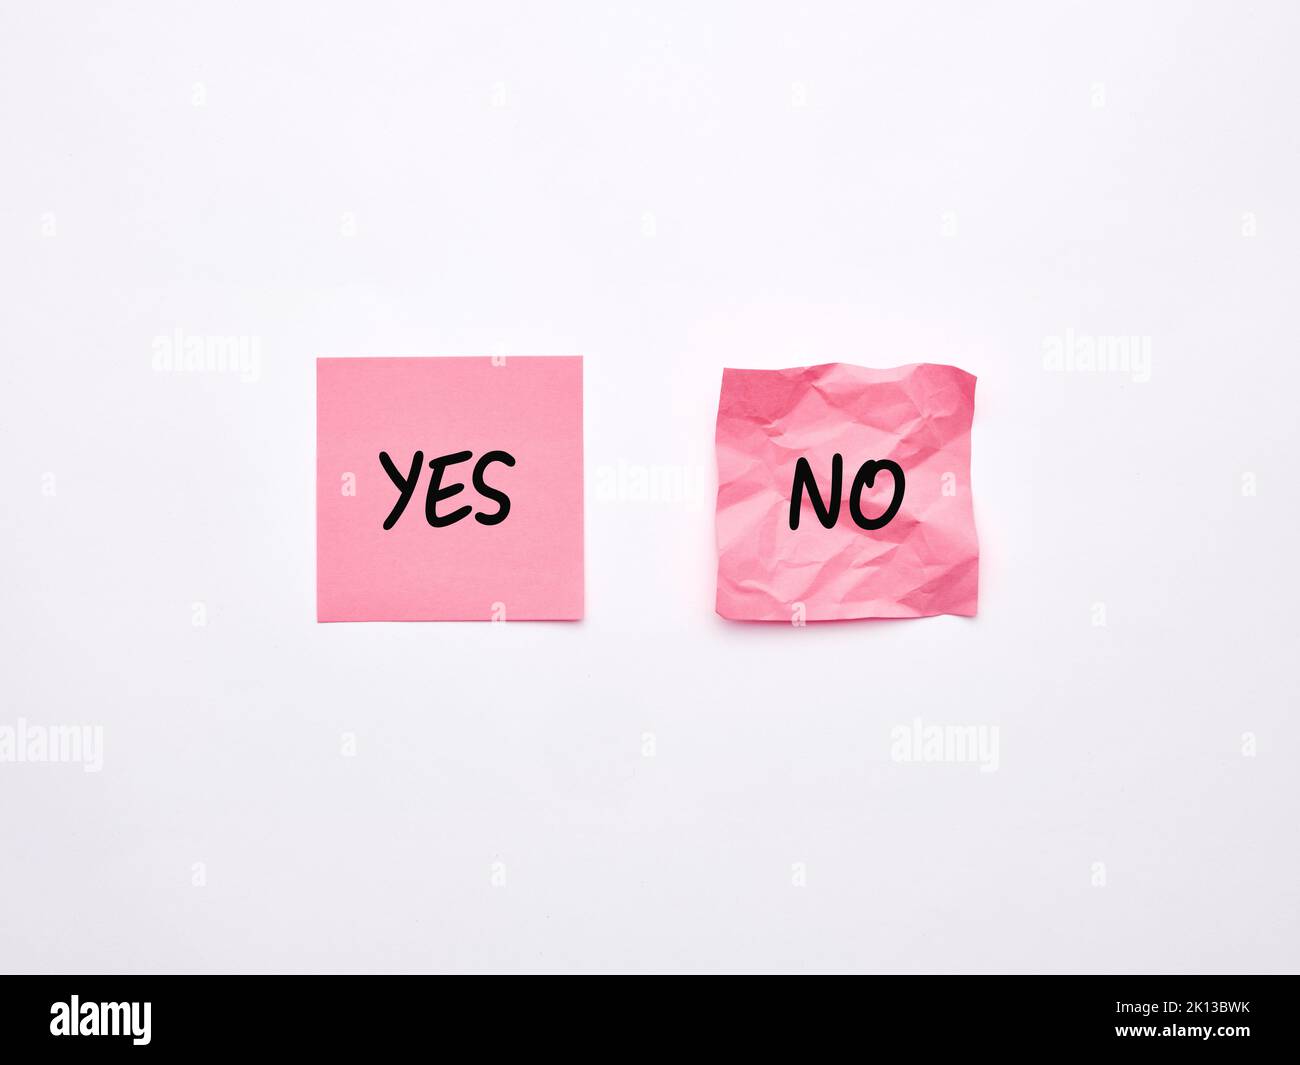 The words yes and no on pink sheets of note paper. Say or choose yes concept Stock Photo